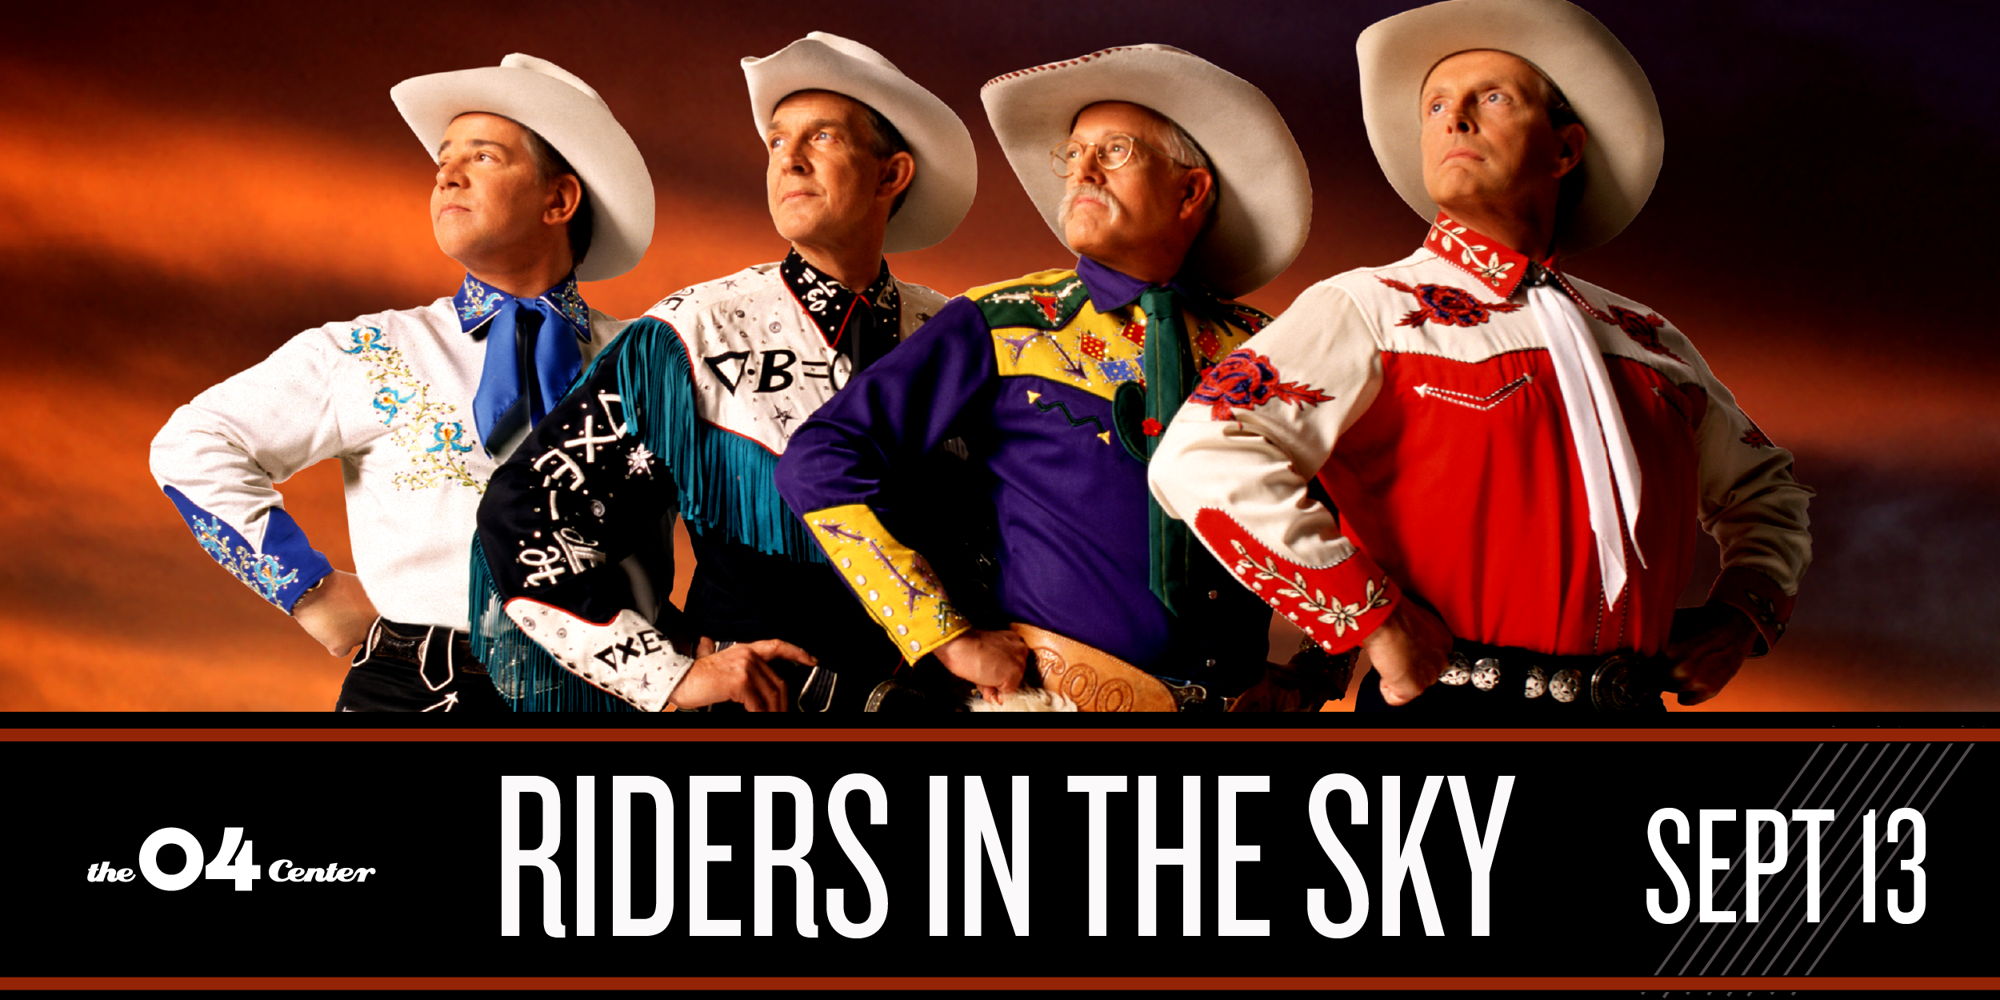  Riders In The Sky promotional image